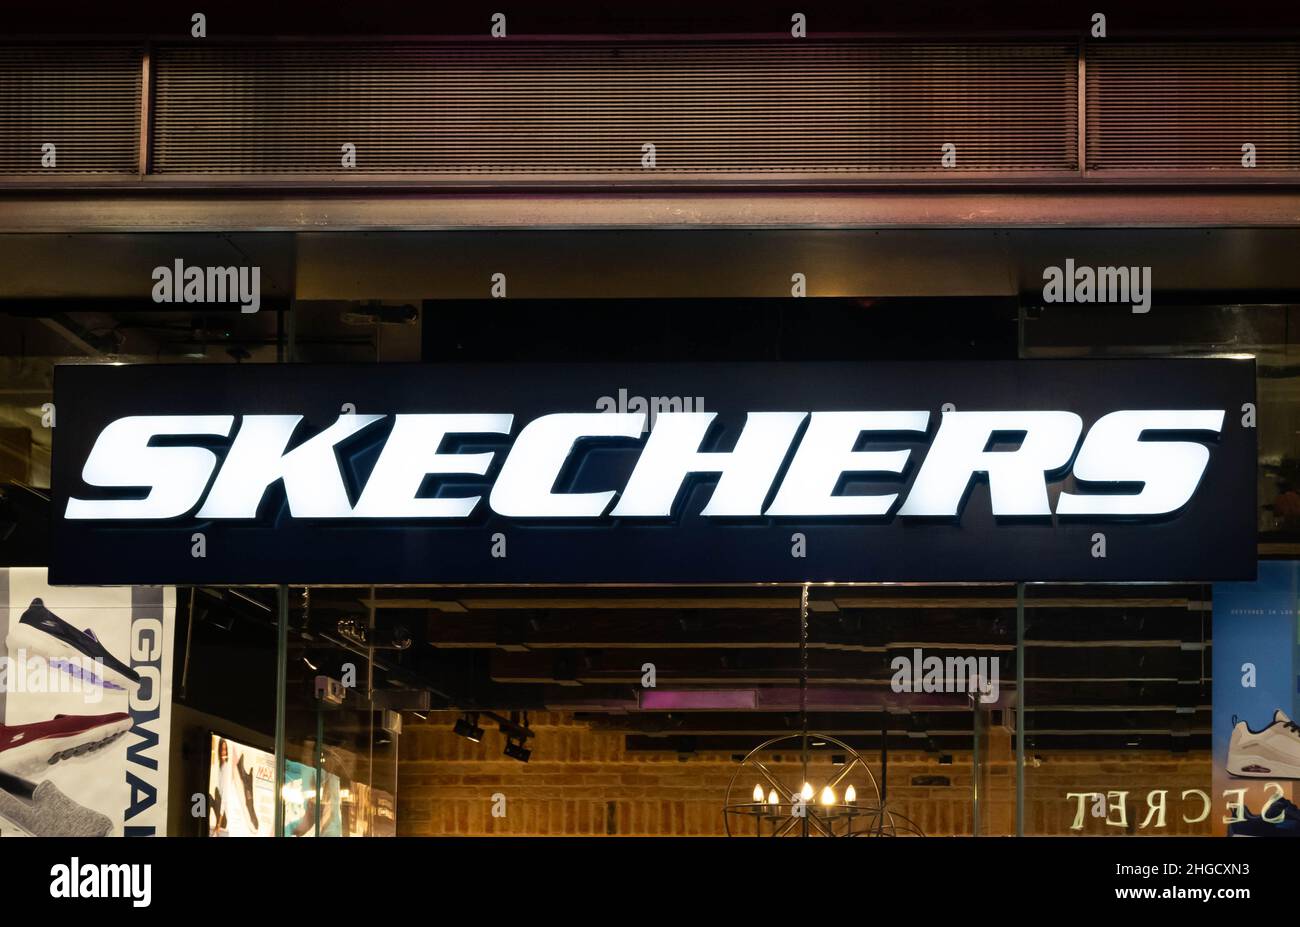 Skechers Store Logo High Resolution Stock Photography and Images - Alamy